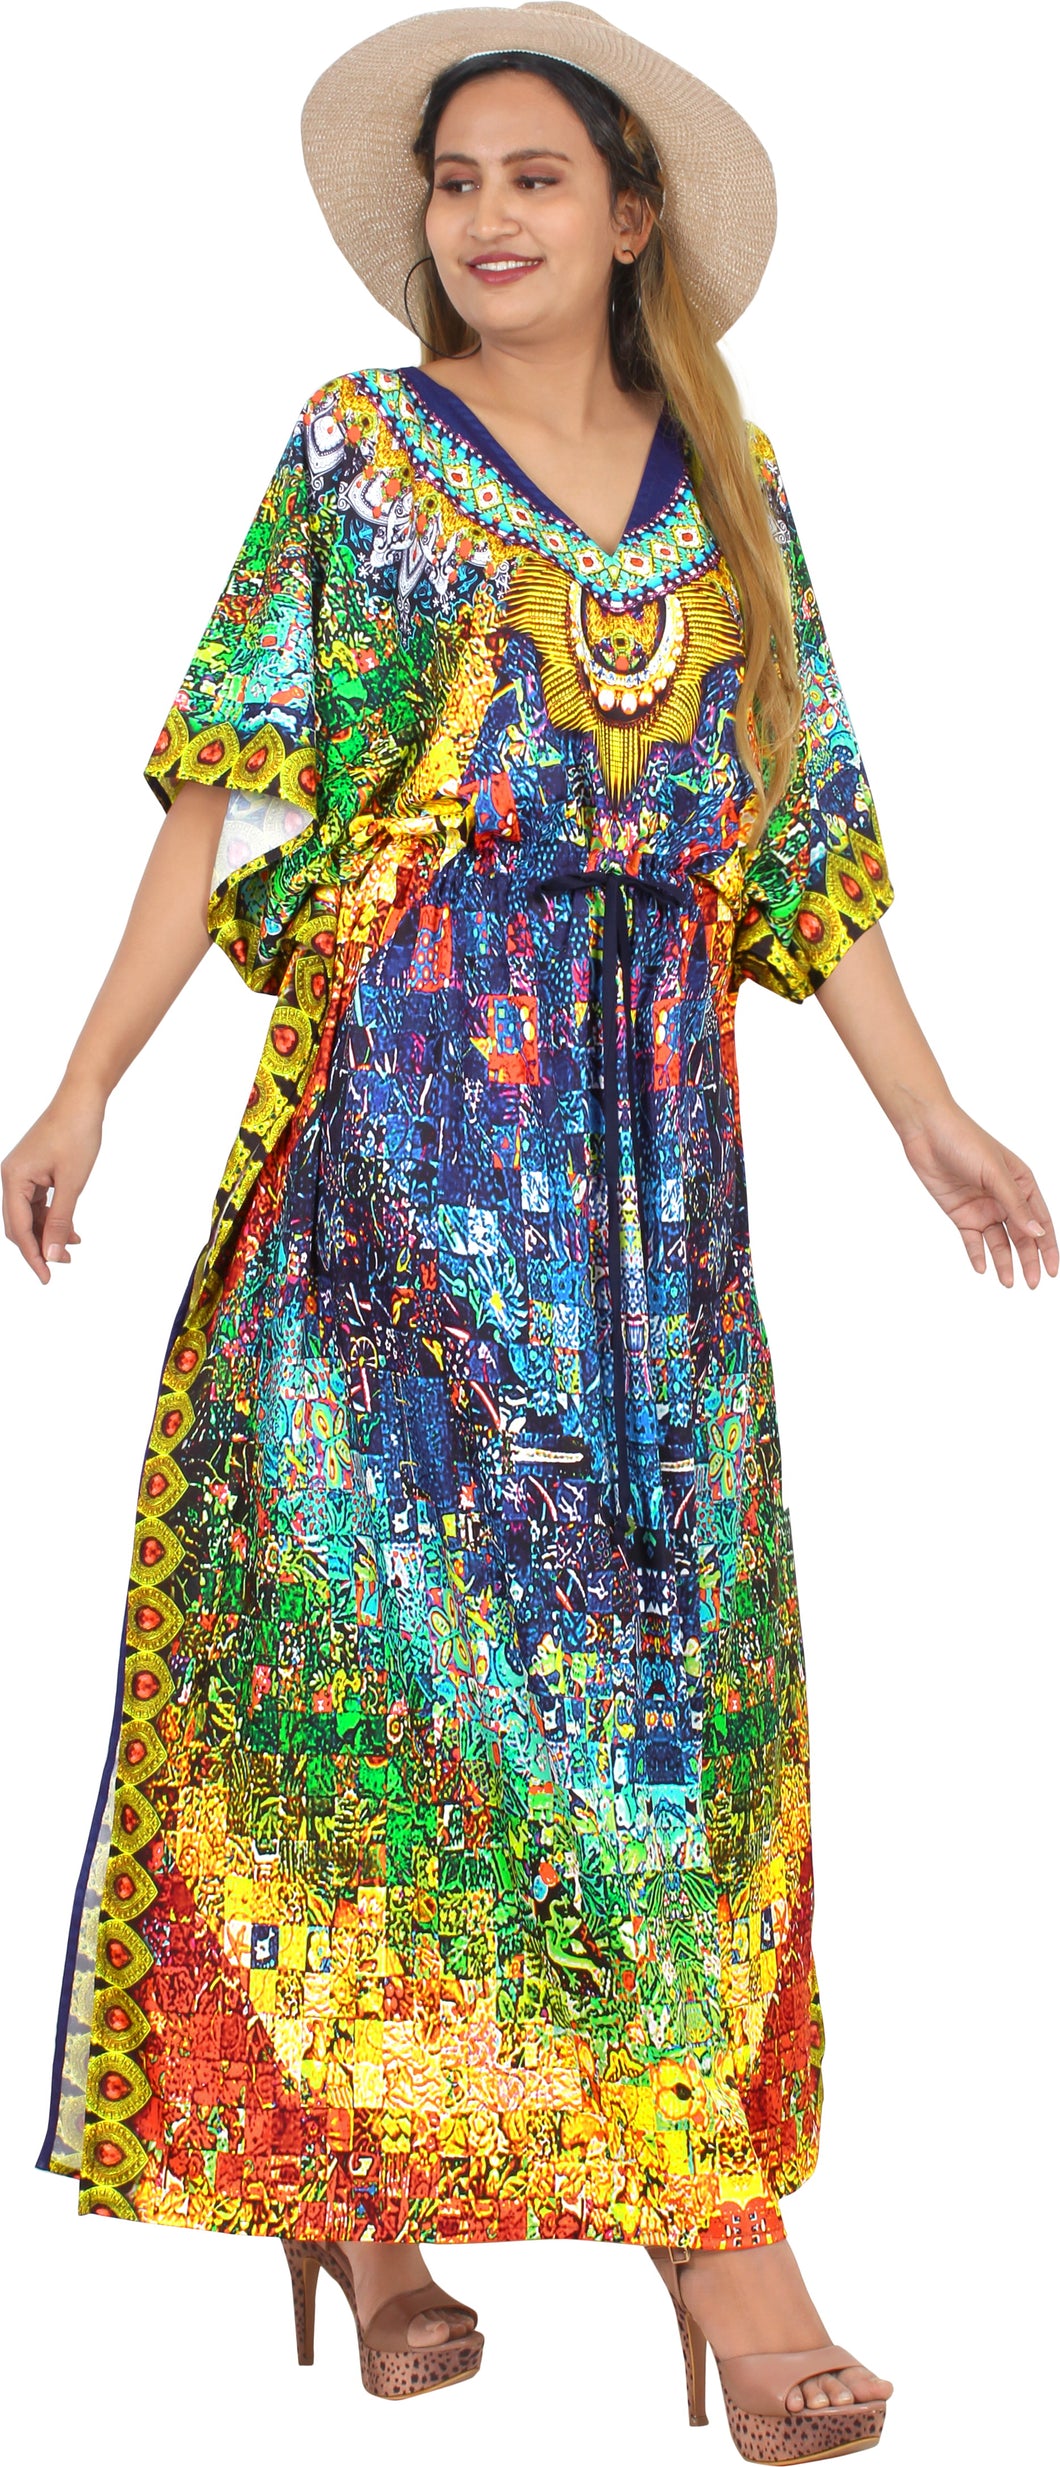 Ethereal Mosaic Long Multi Color Abstract Printed Caftan For Women